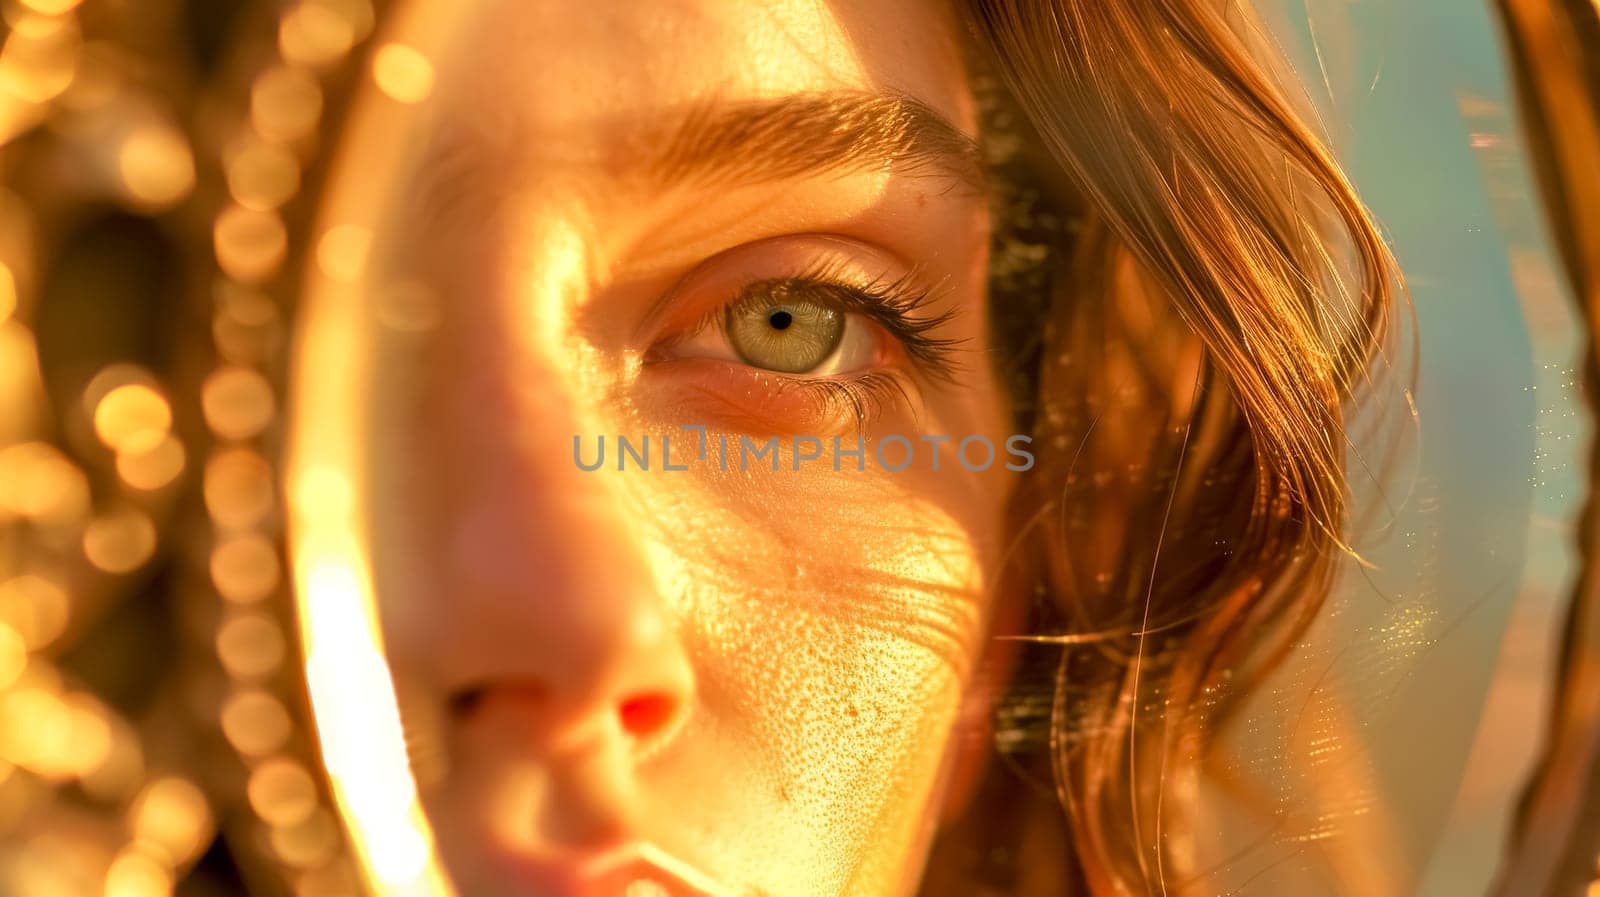 Captivating close-up portrait of a serene and tranquil caucasian woman during the intimate golden hour